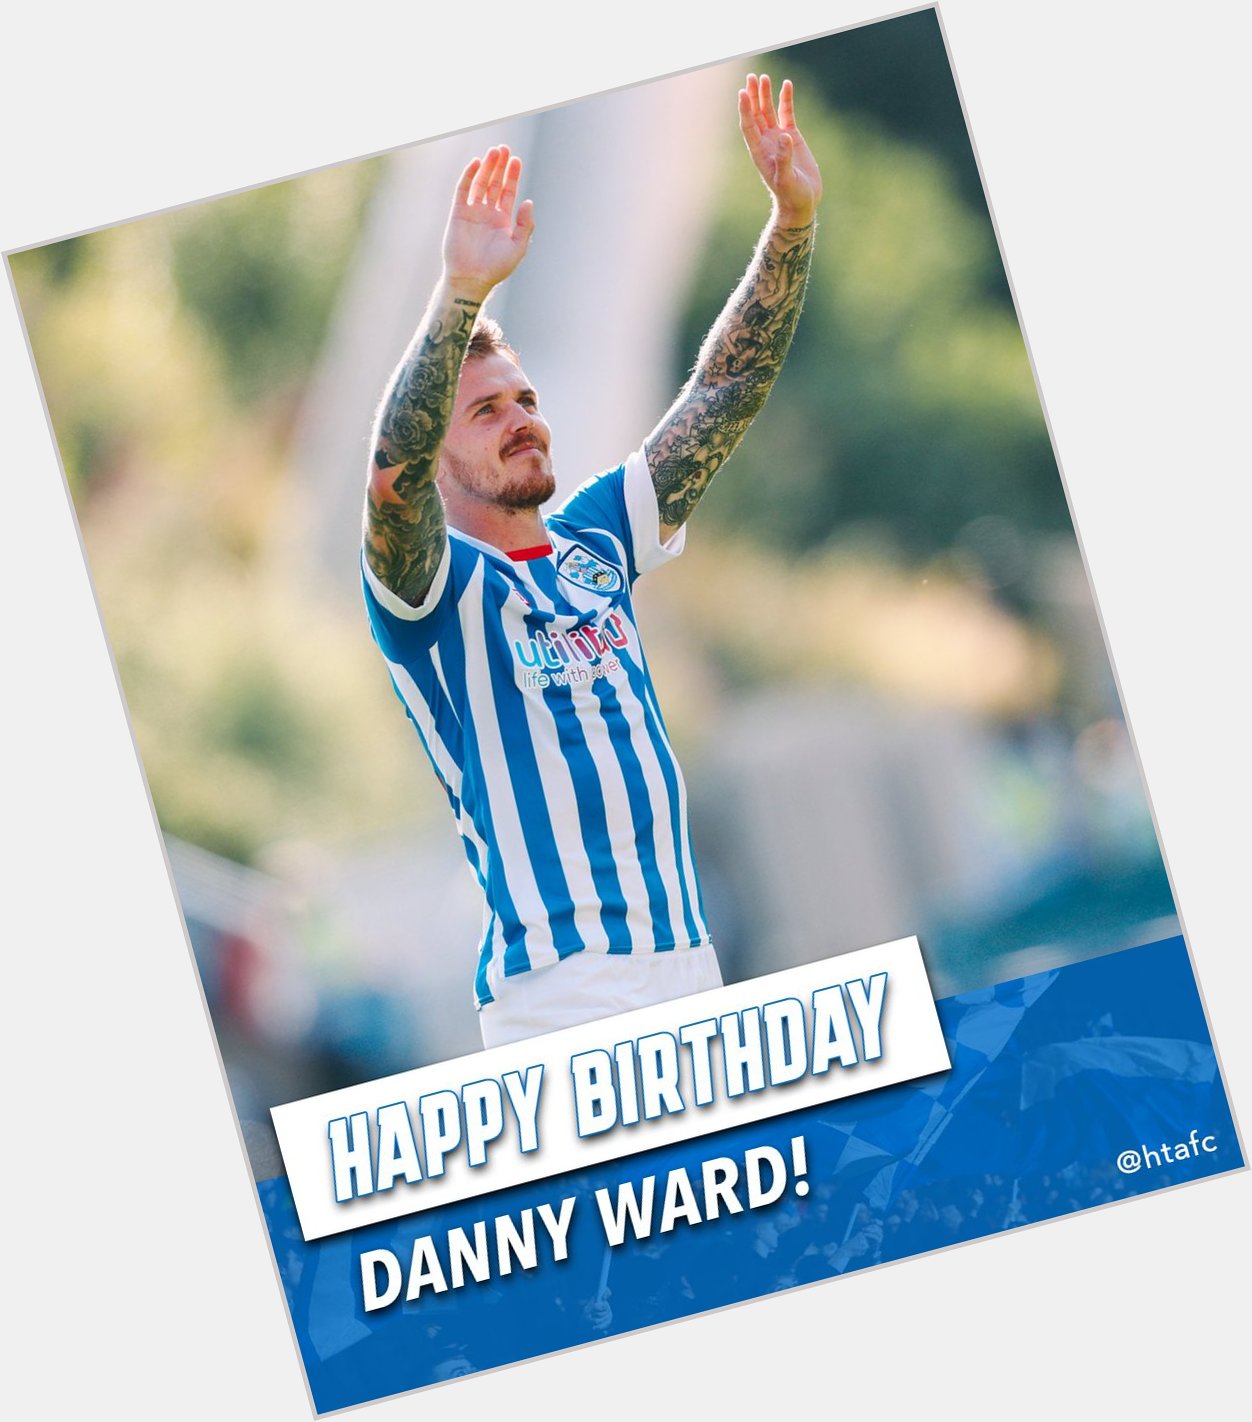  Happy Birthday Danny Ward!

We hope you have a brilliant day  